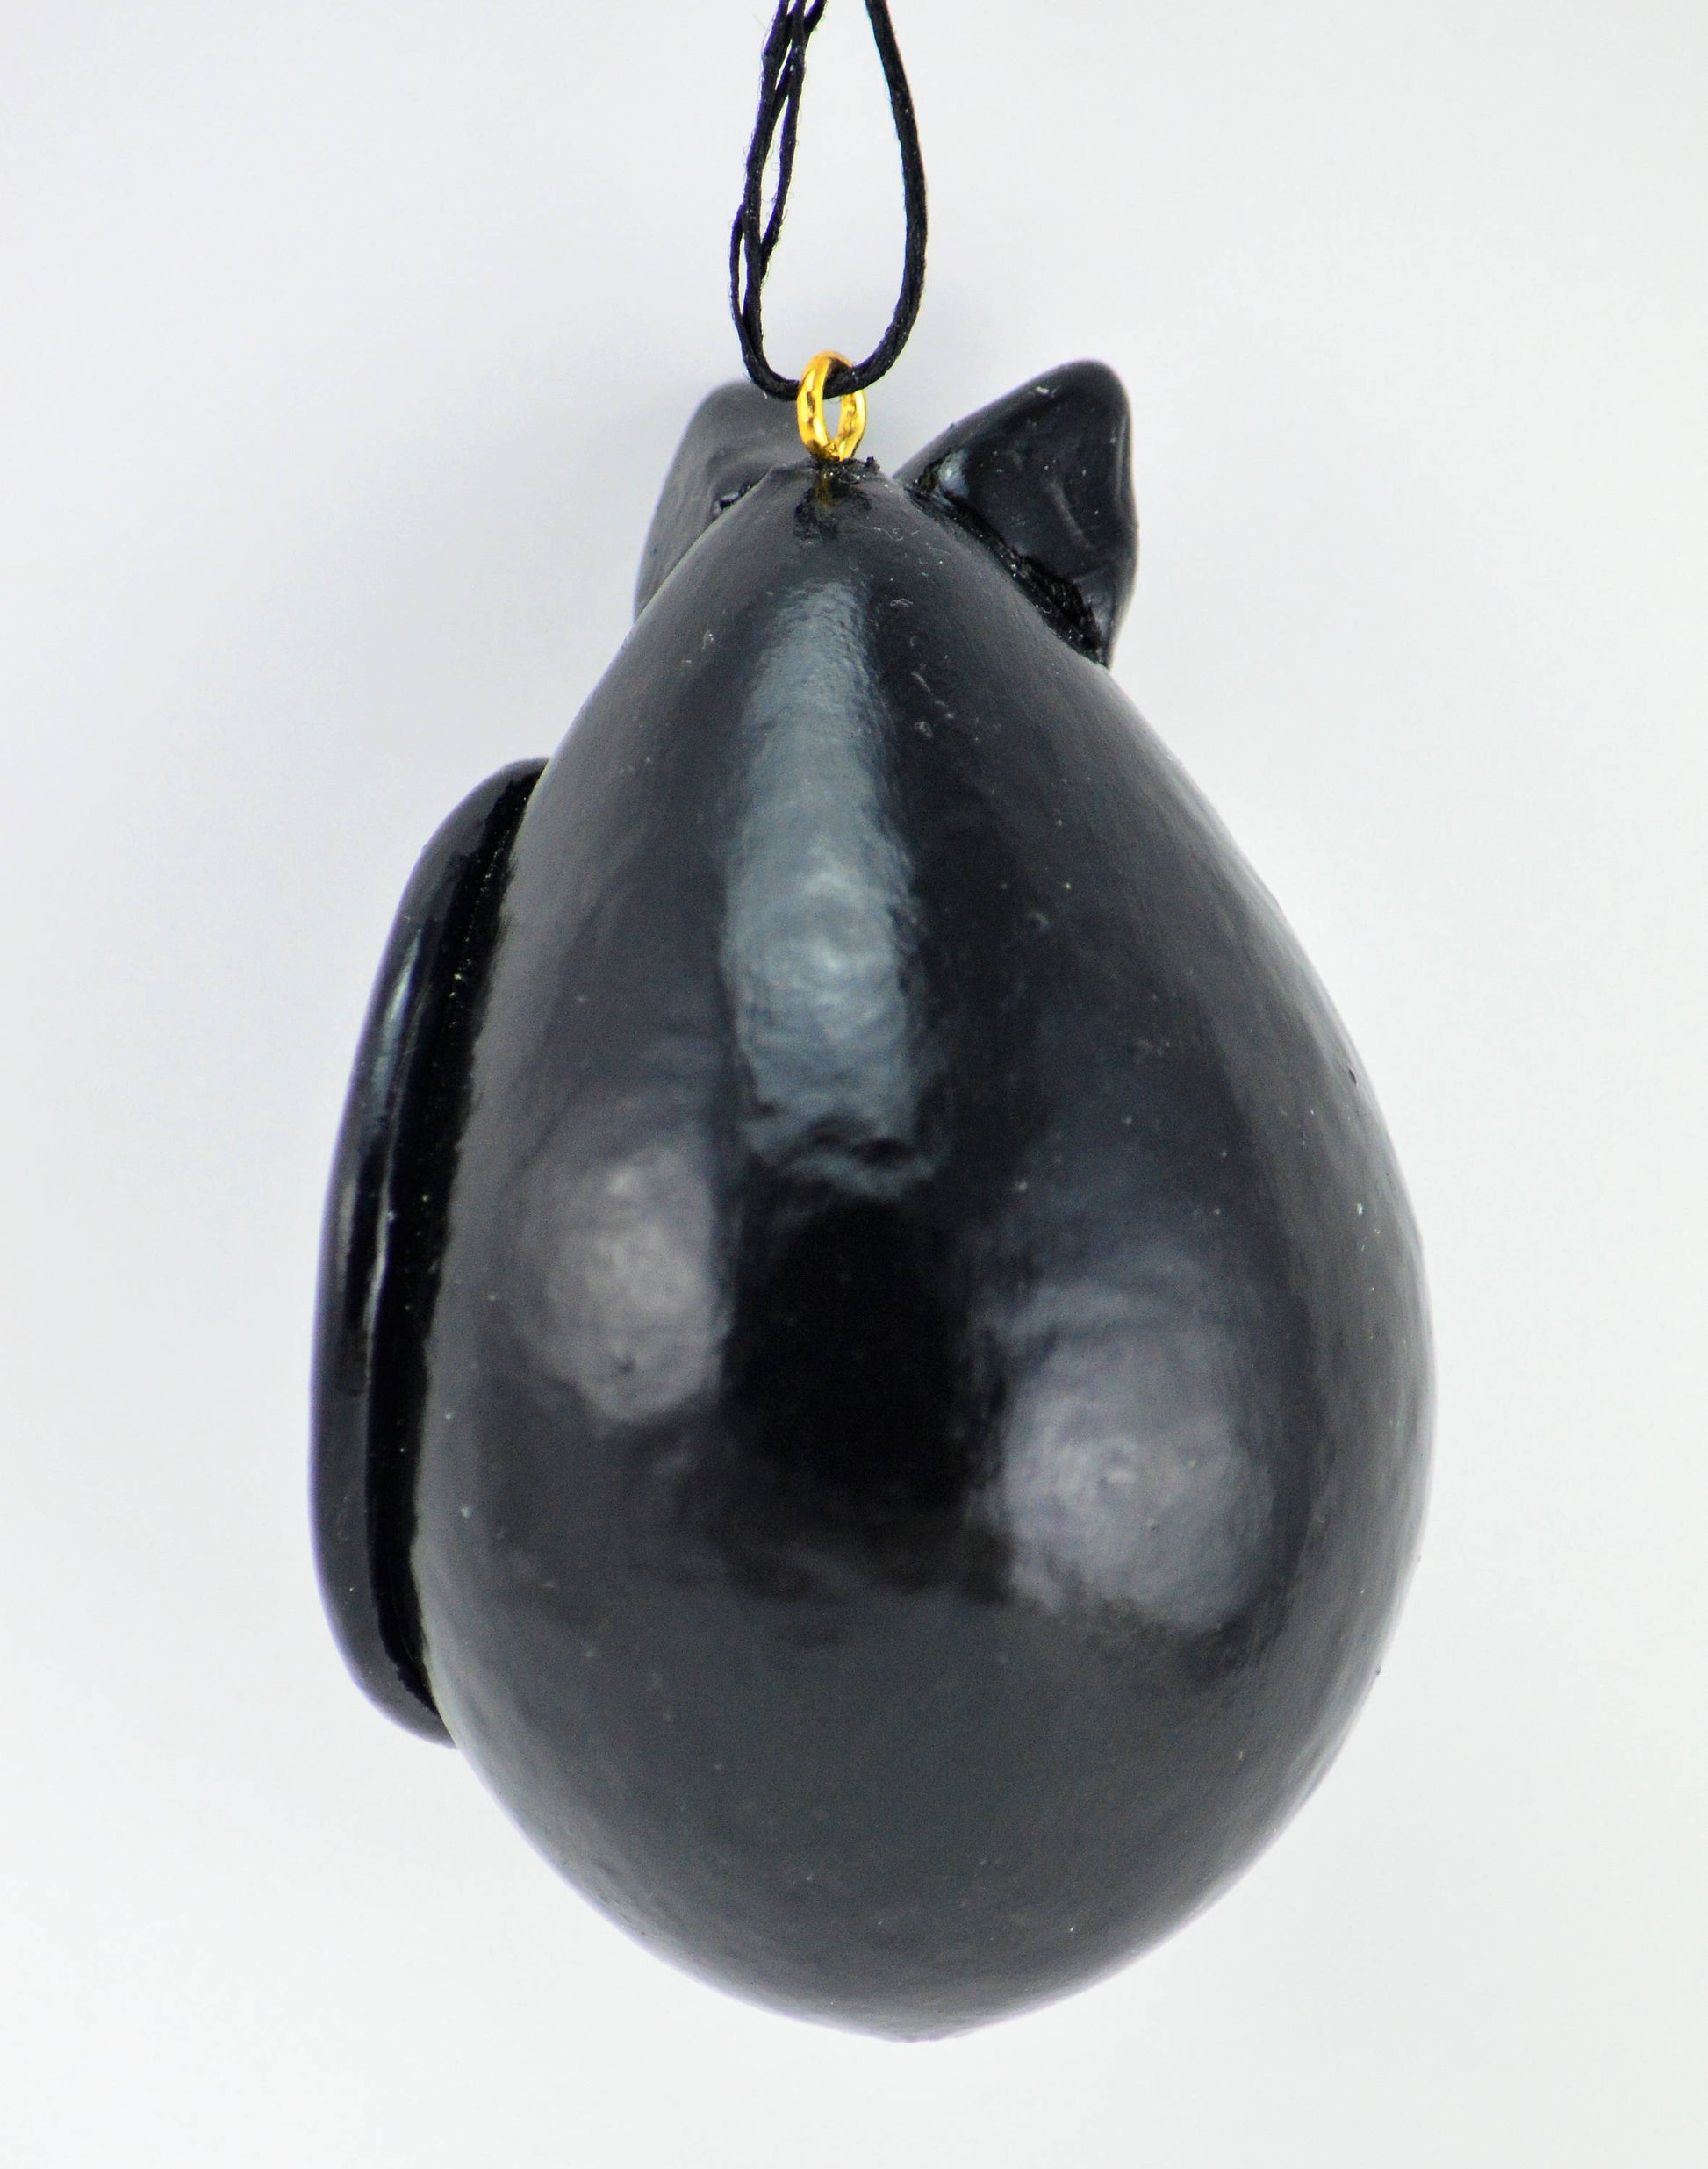 Tuxedo Cat, Egg gourd ornament, Gourdament, Black and white cat, hanging cat, Christmas Ornaments Handmade, Holiday ornaments - Gourdaments